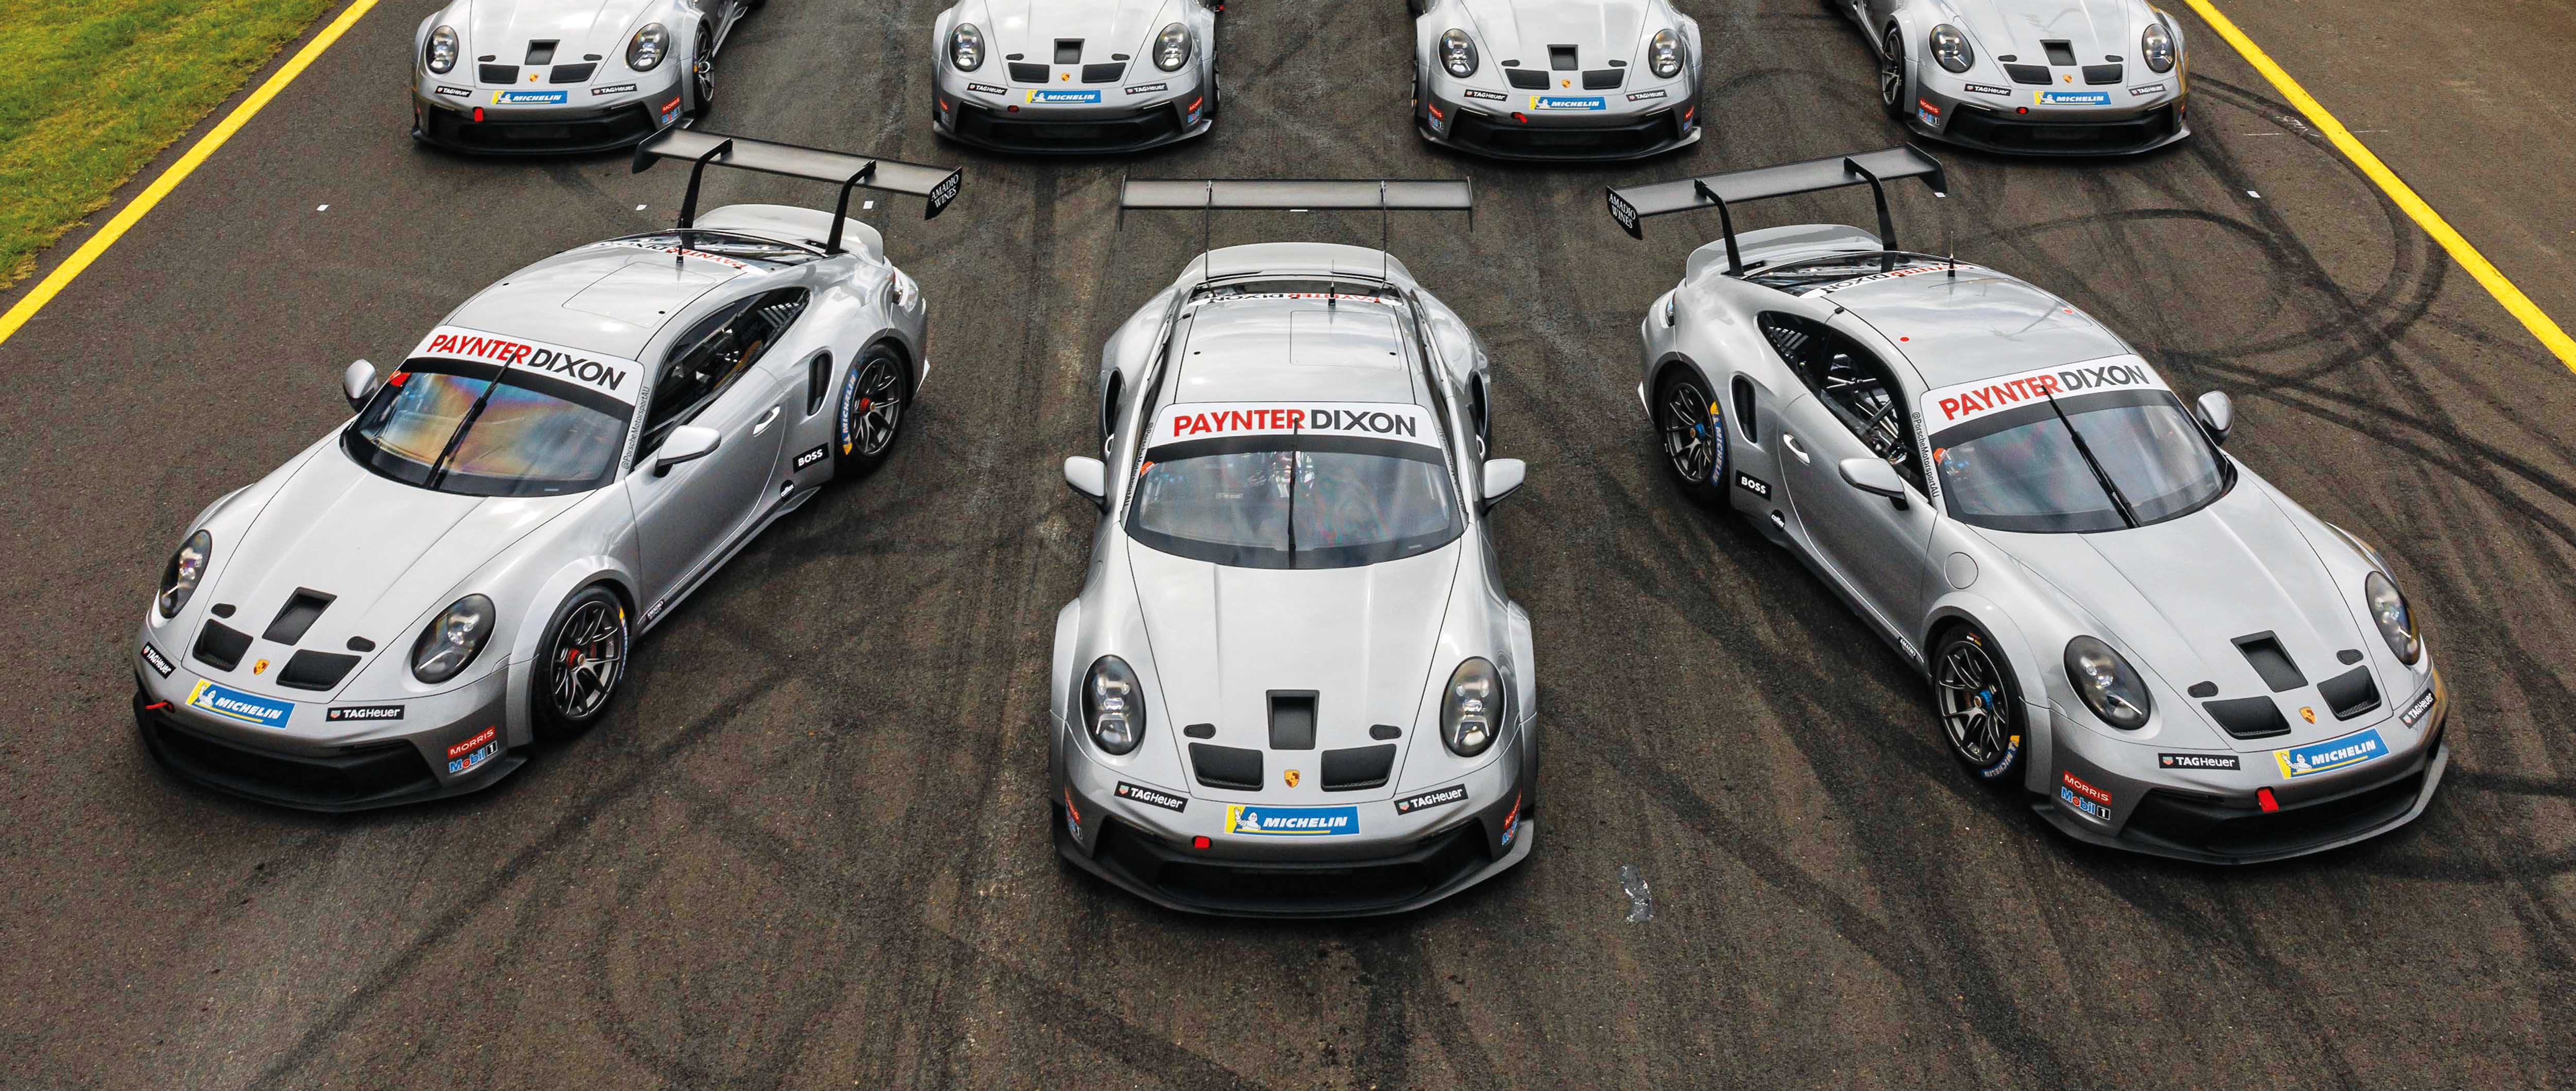 The New Gt Cup Racer Fascinating Facts Porsche Christophorus